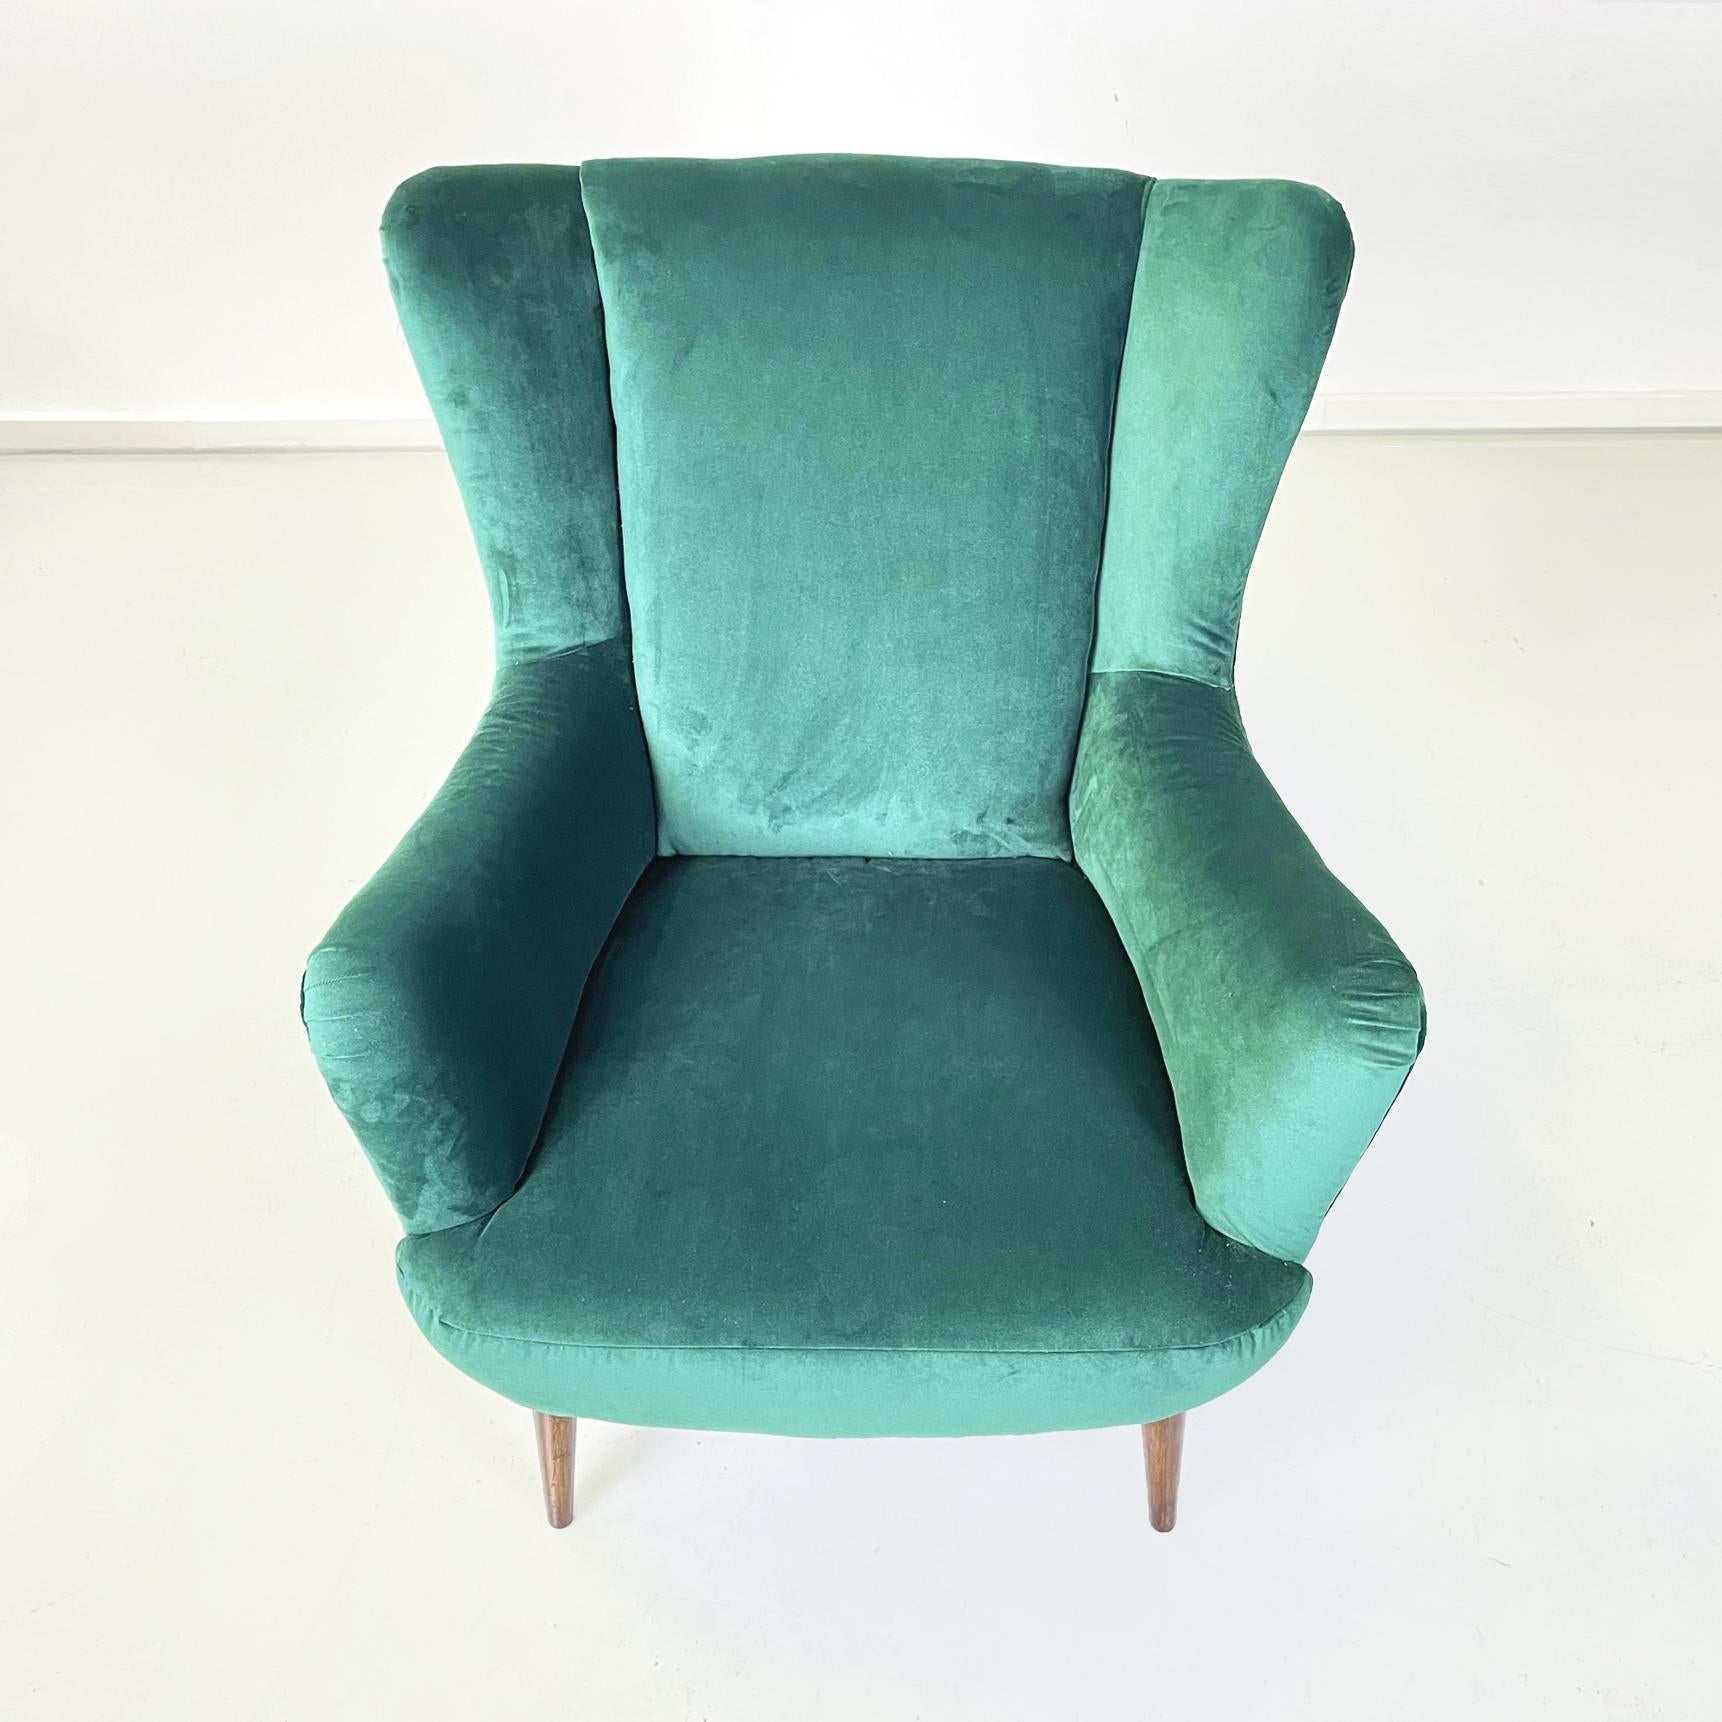 Italian Mid-Century Armchairs in Forest Green Velvet and Wooden Legs, 1950s For Sale 1